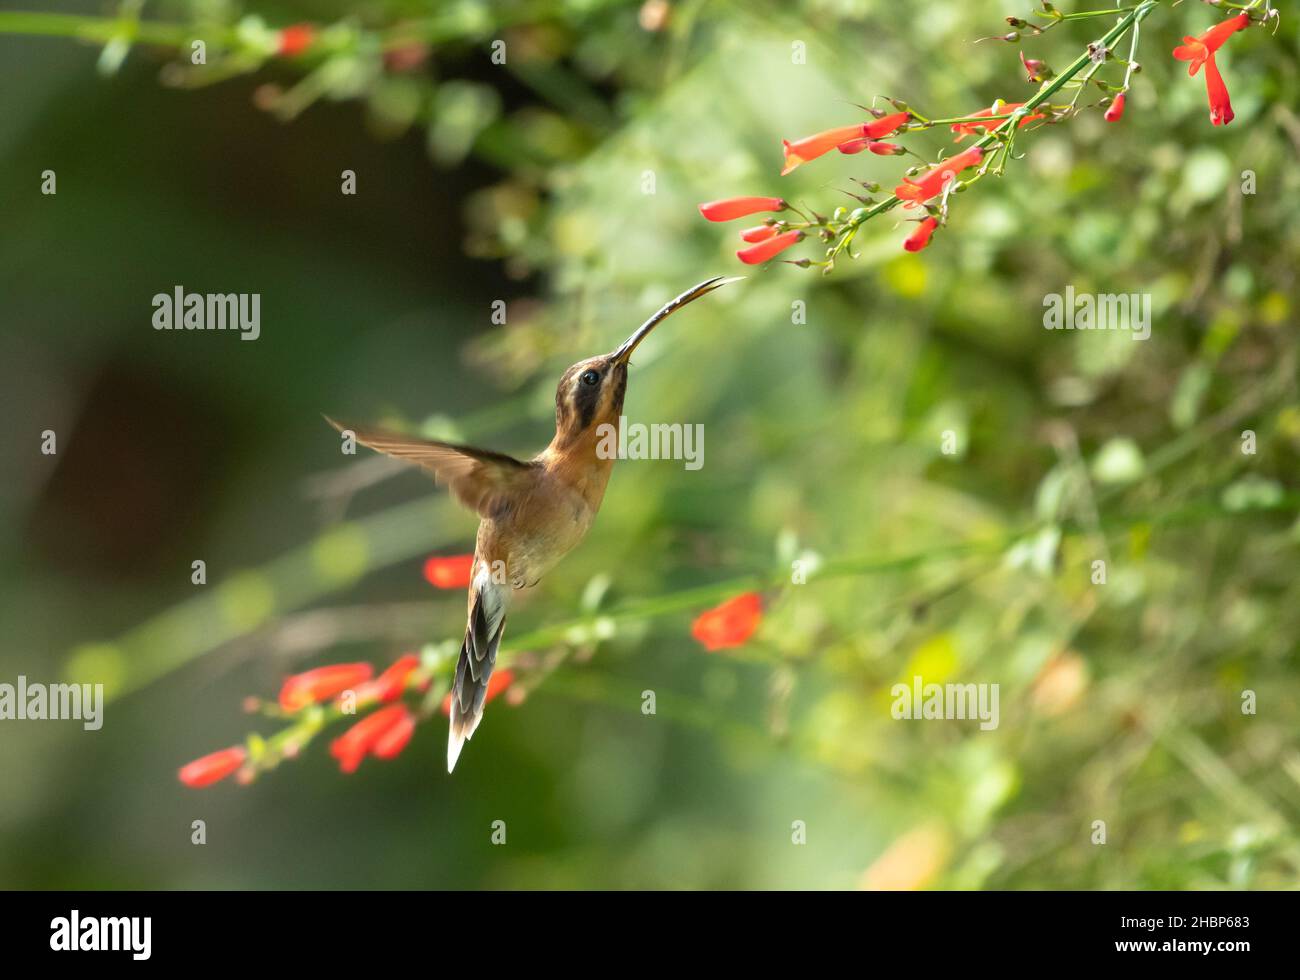 Little Hermit hummingbirds, Phaethornis Longuemareus feeding on red Antigua Heath flowers with green plants blurred in the background and warm morning Stock Photo